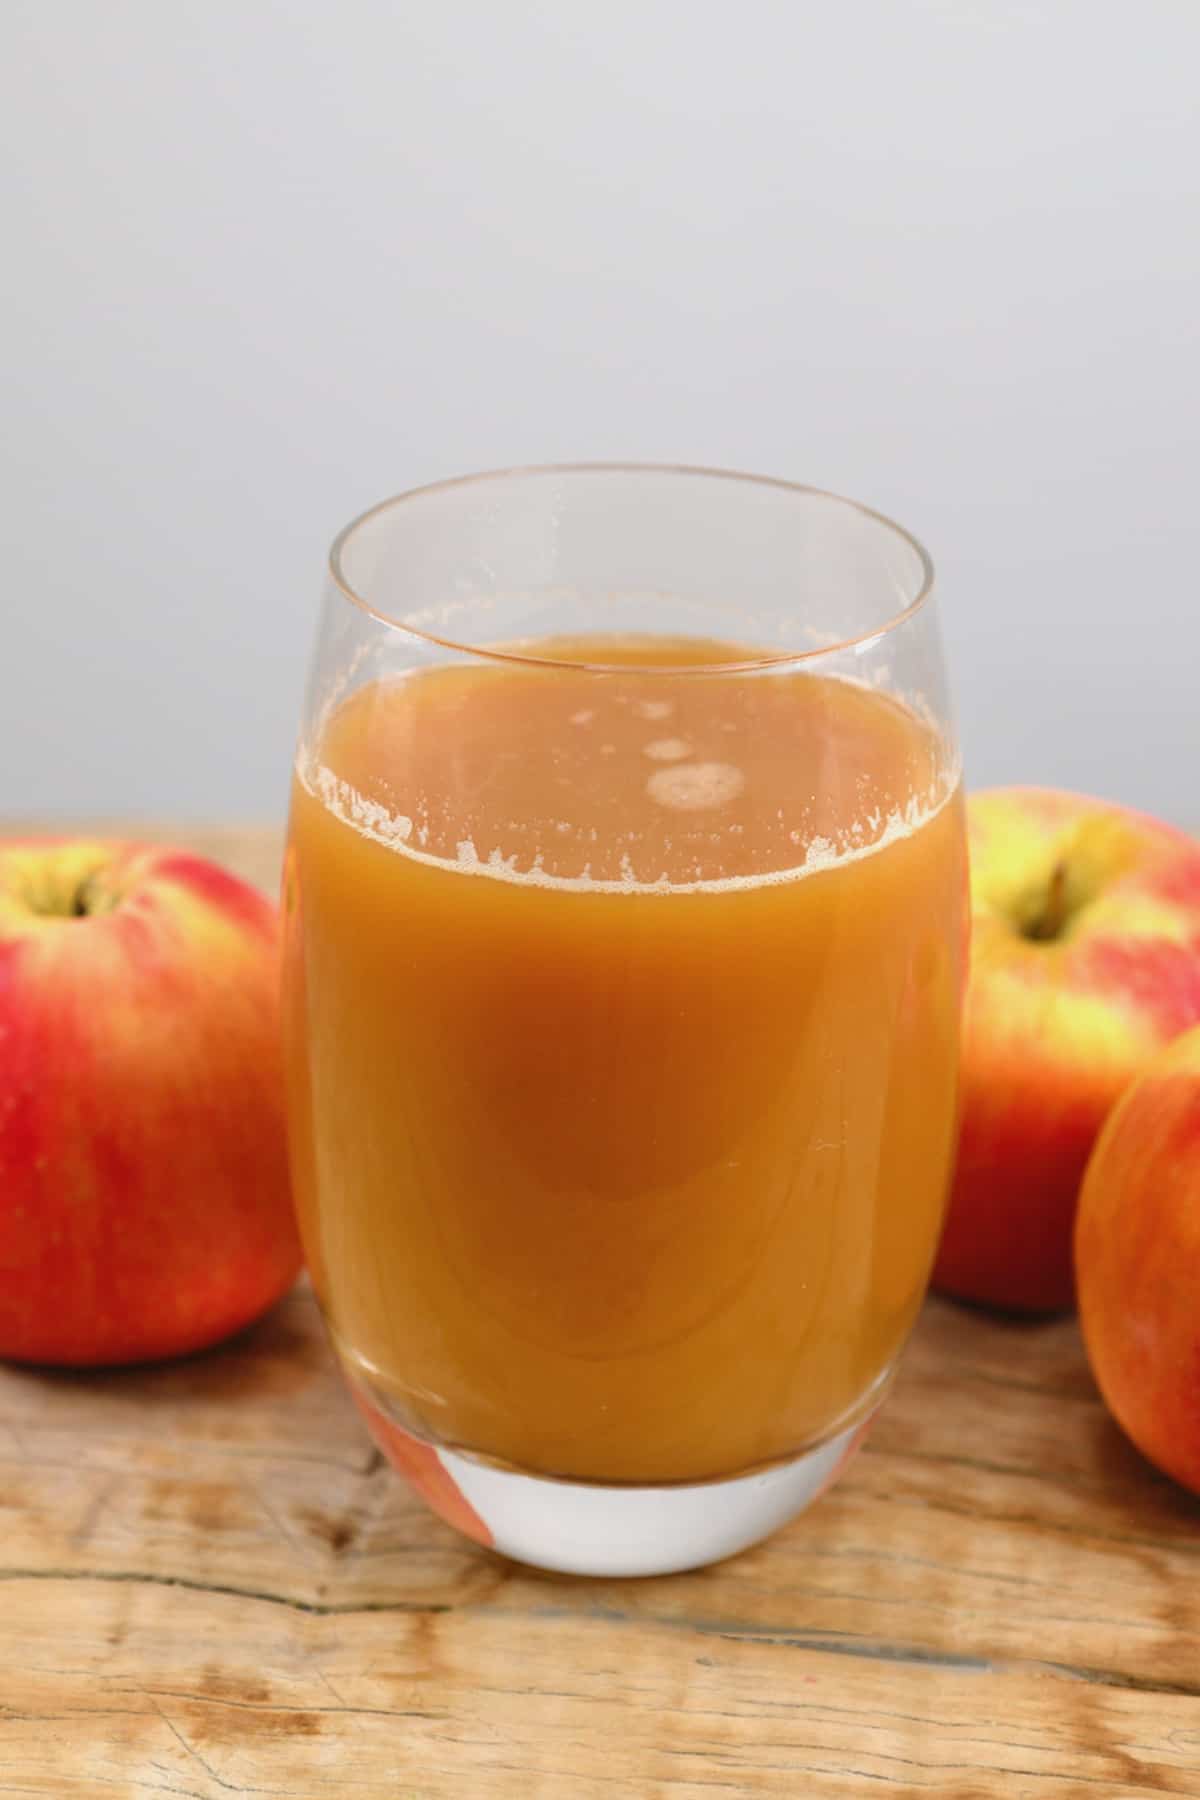 A glass of apple juice and three apples